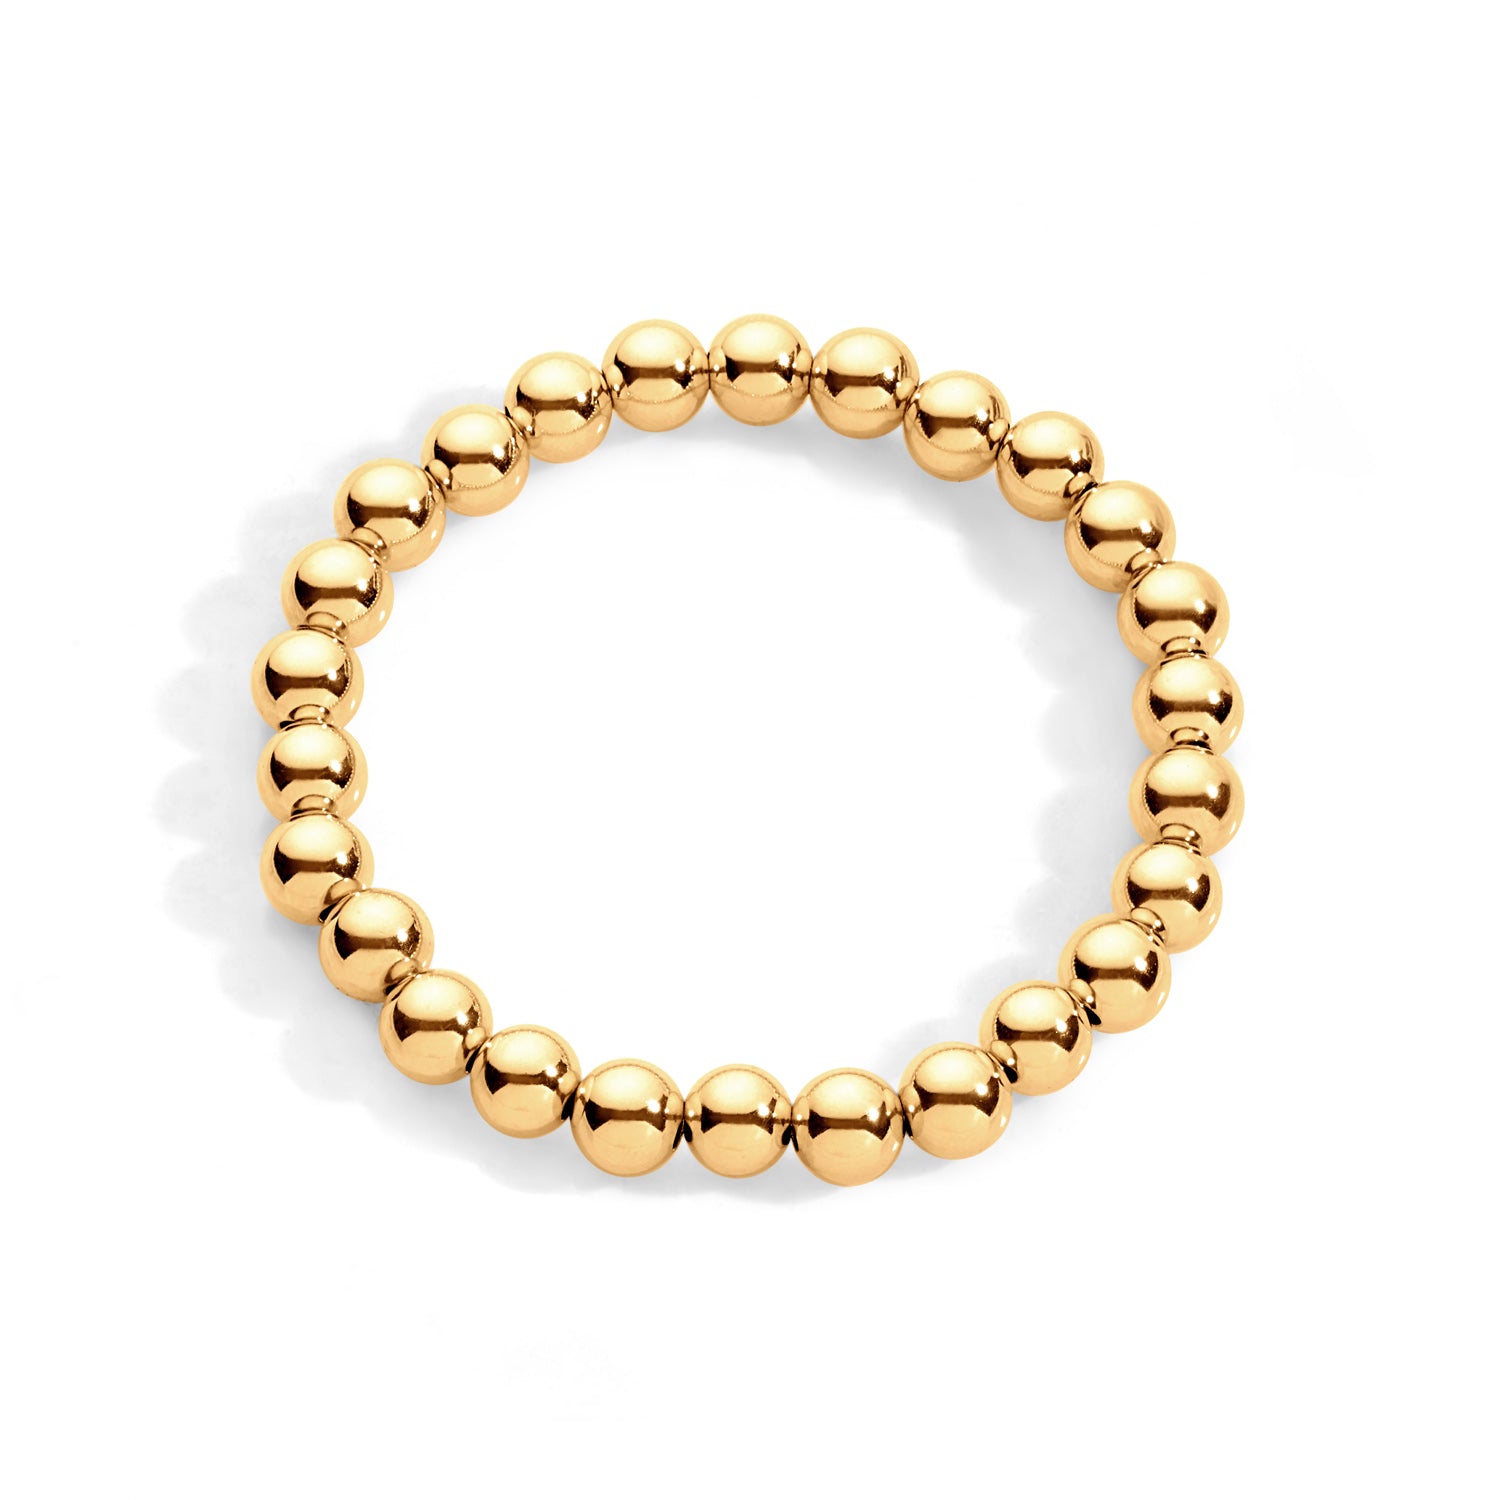 Golden Beaded Ball Bracelets Are Always a London Classic